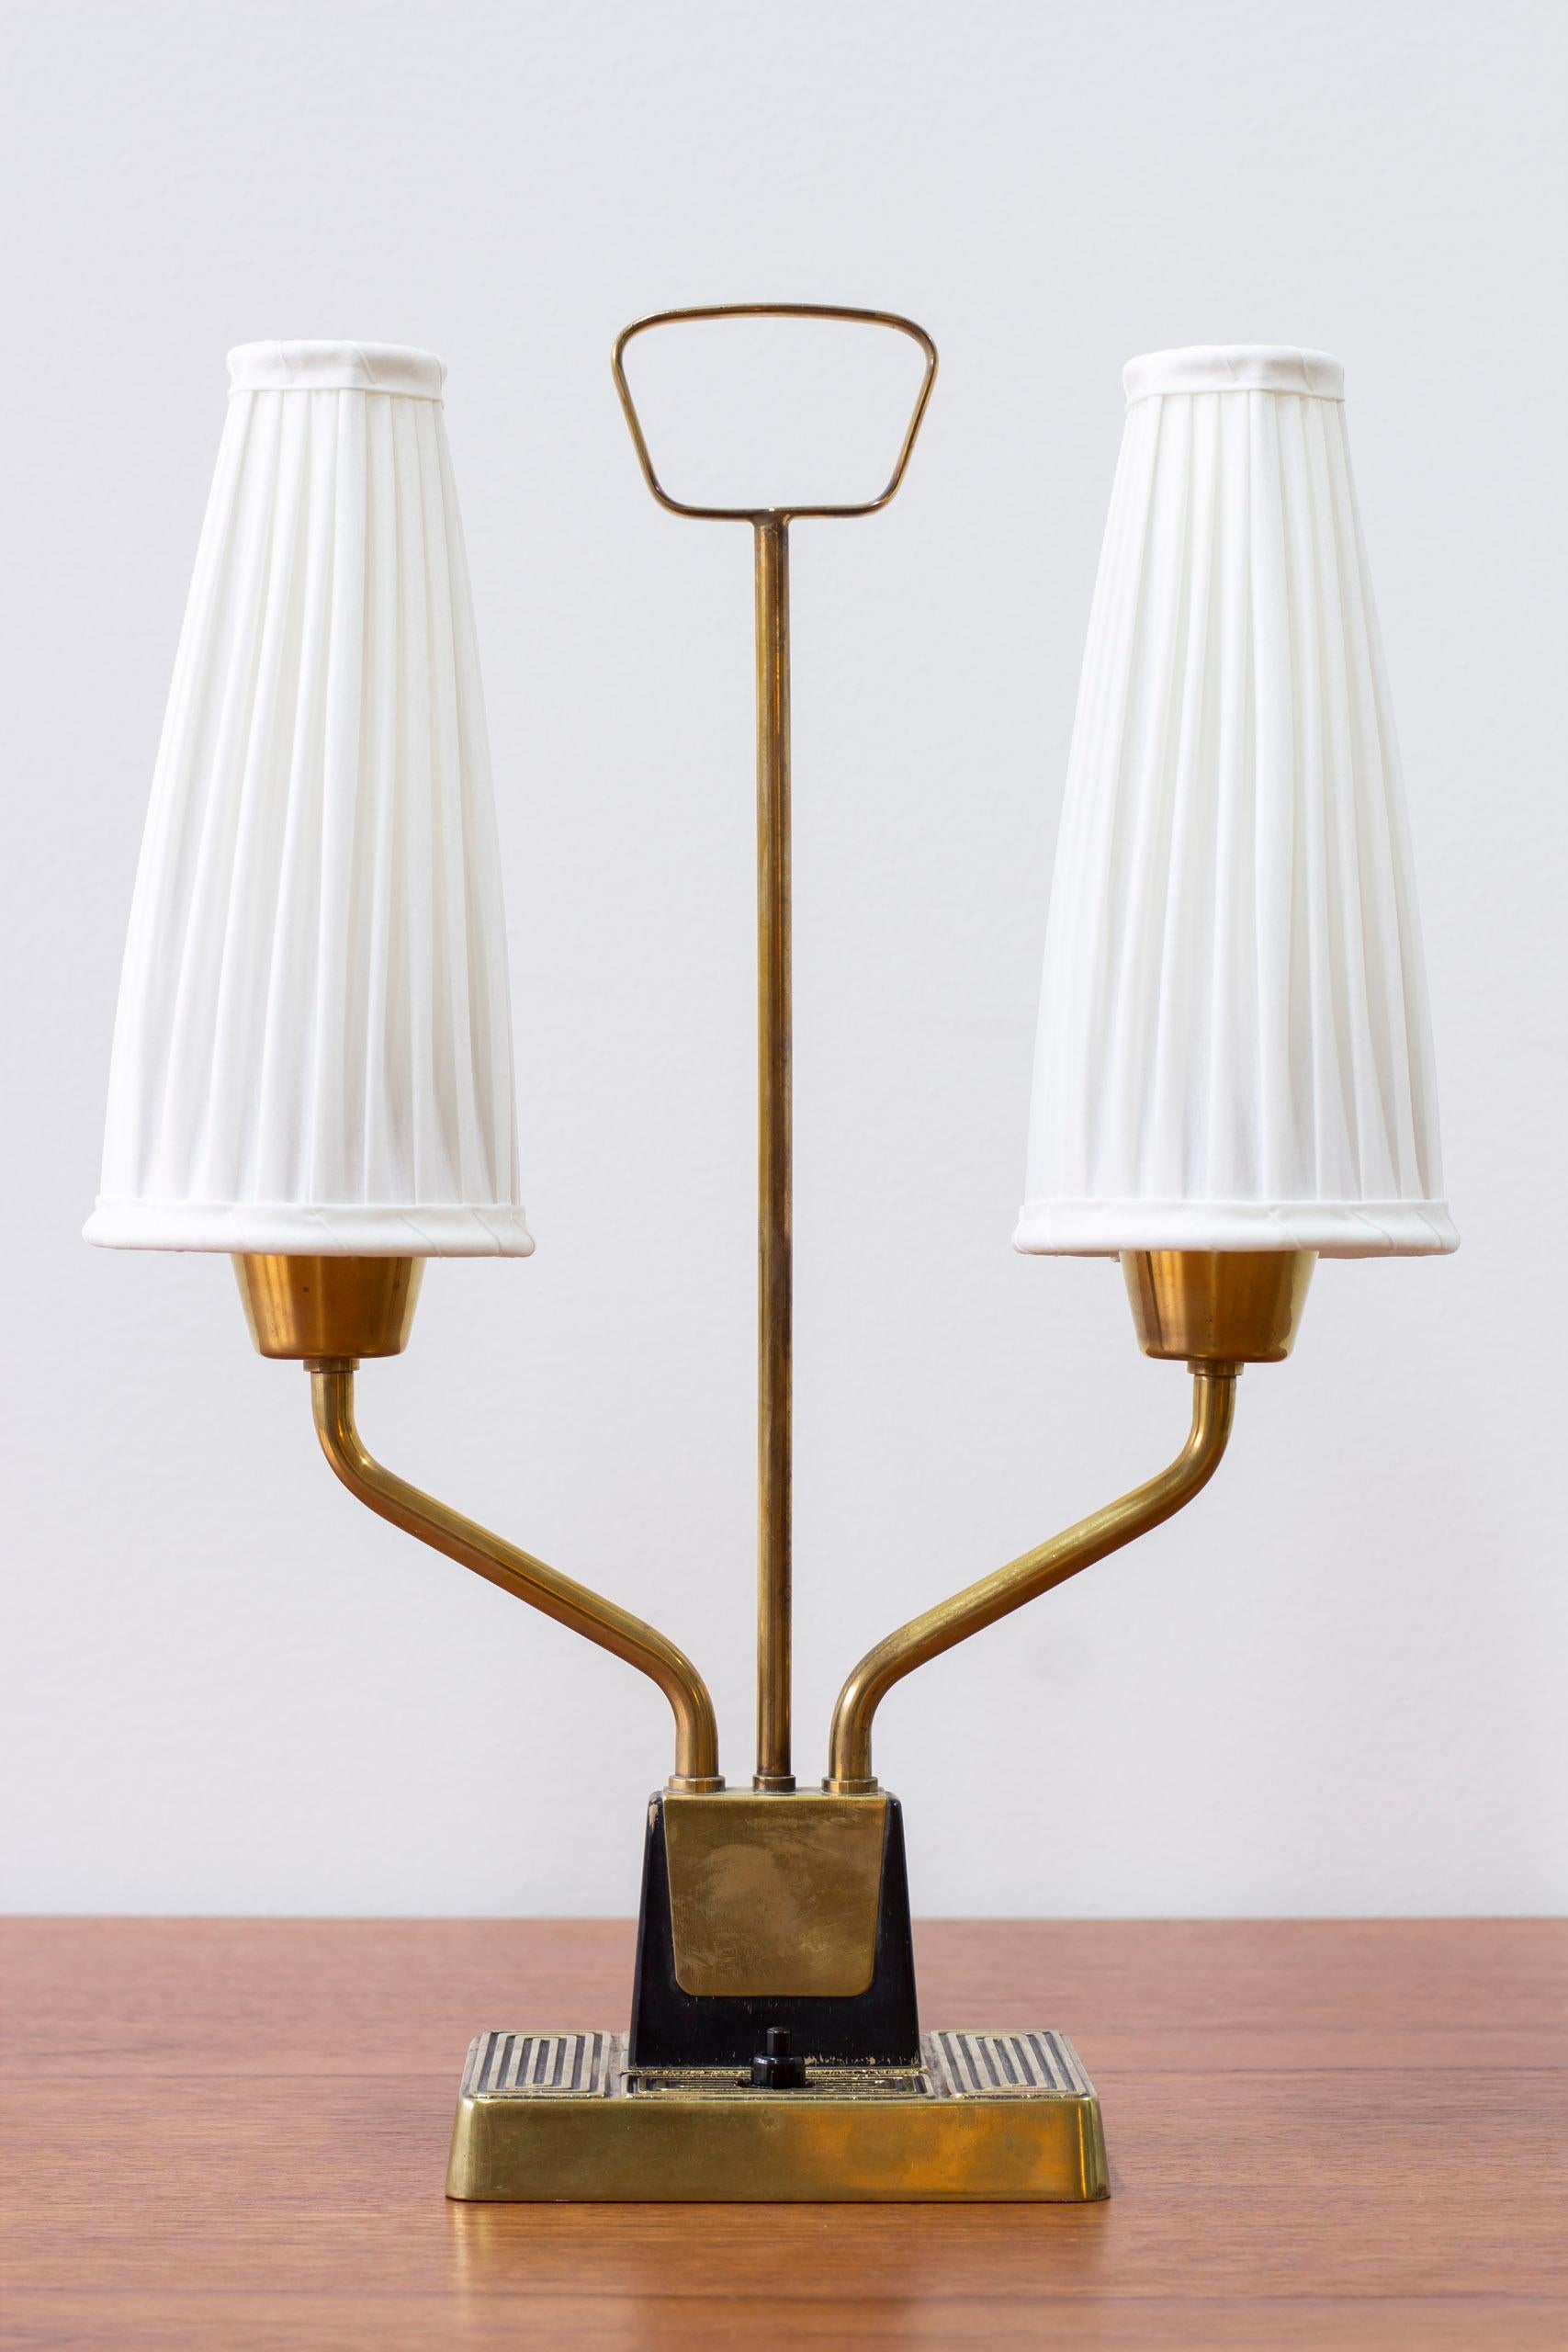 Swedish Brass table lamp by ASEA belysning, Sweden, 1950s For Sale